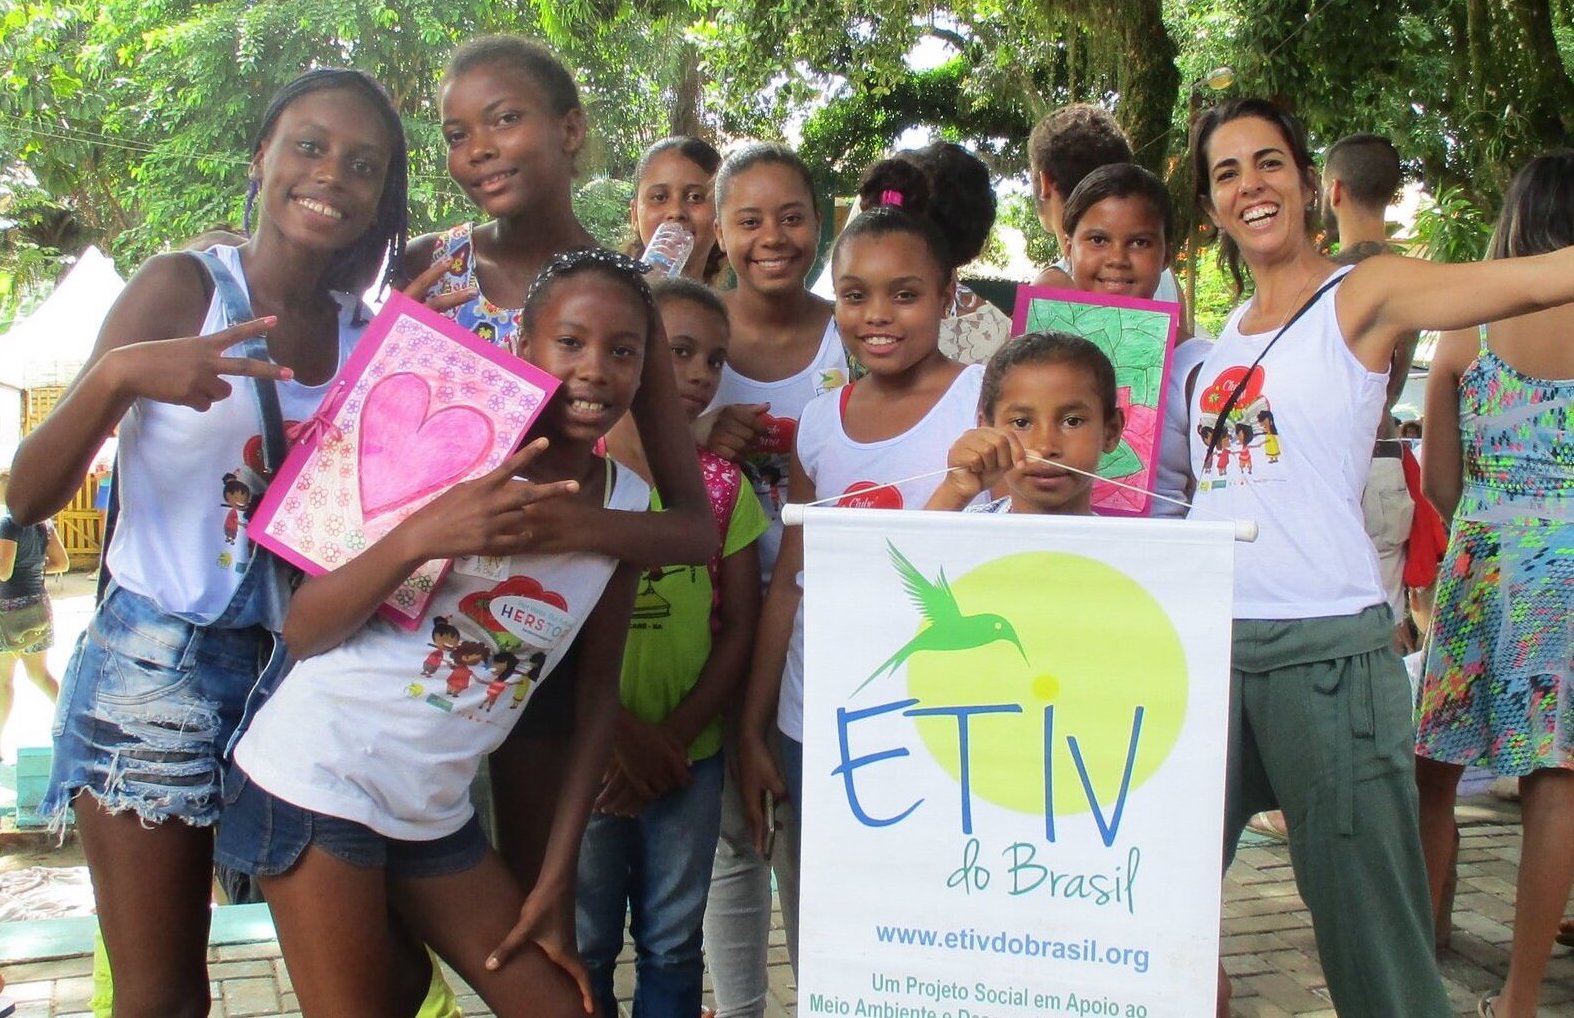 Group of young smiling Brazilian children holding drawings and an "ETIV do Brasil" poster. 